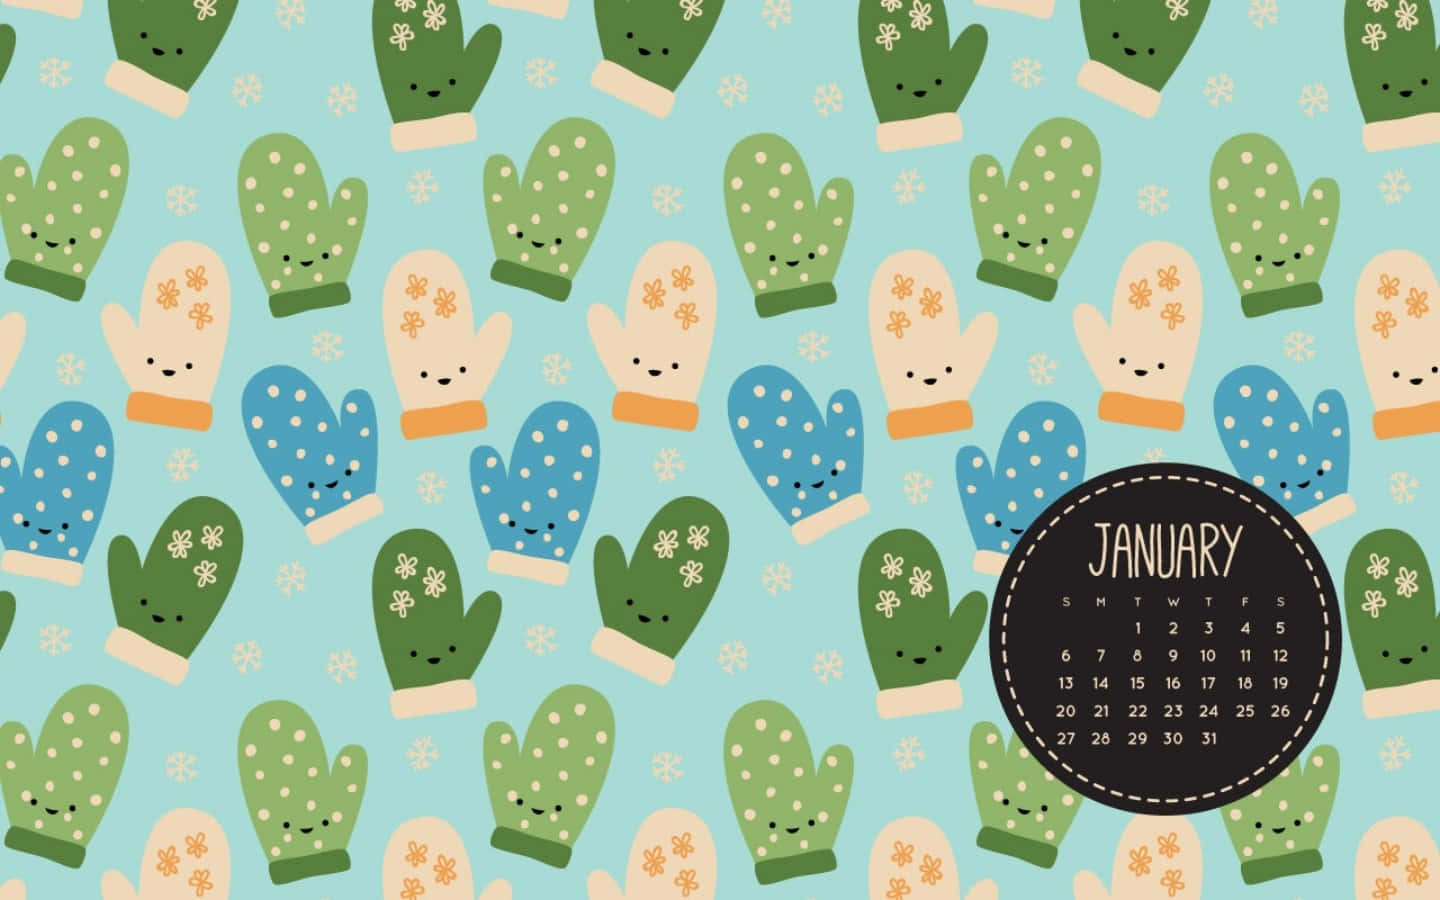 A Calendar With Mittens On It Wallpaper